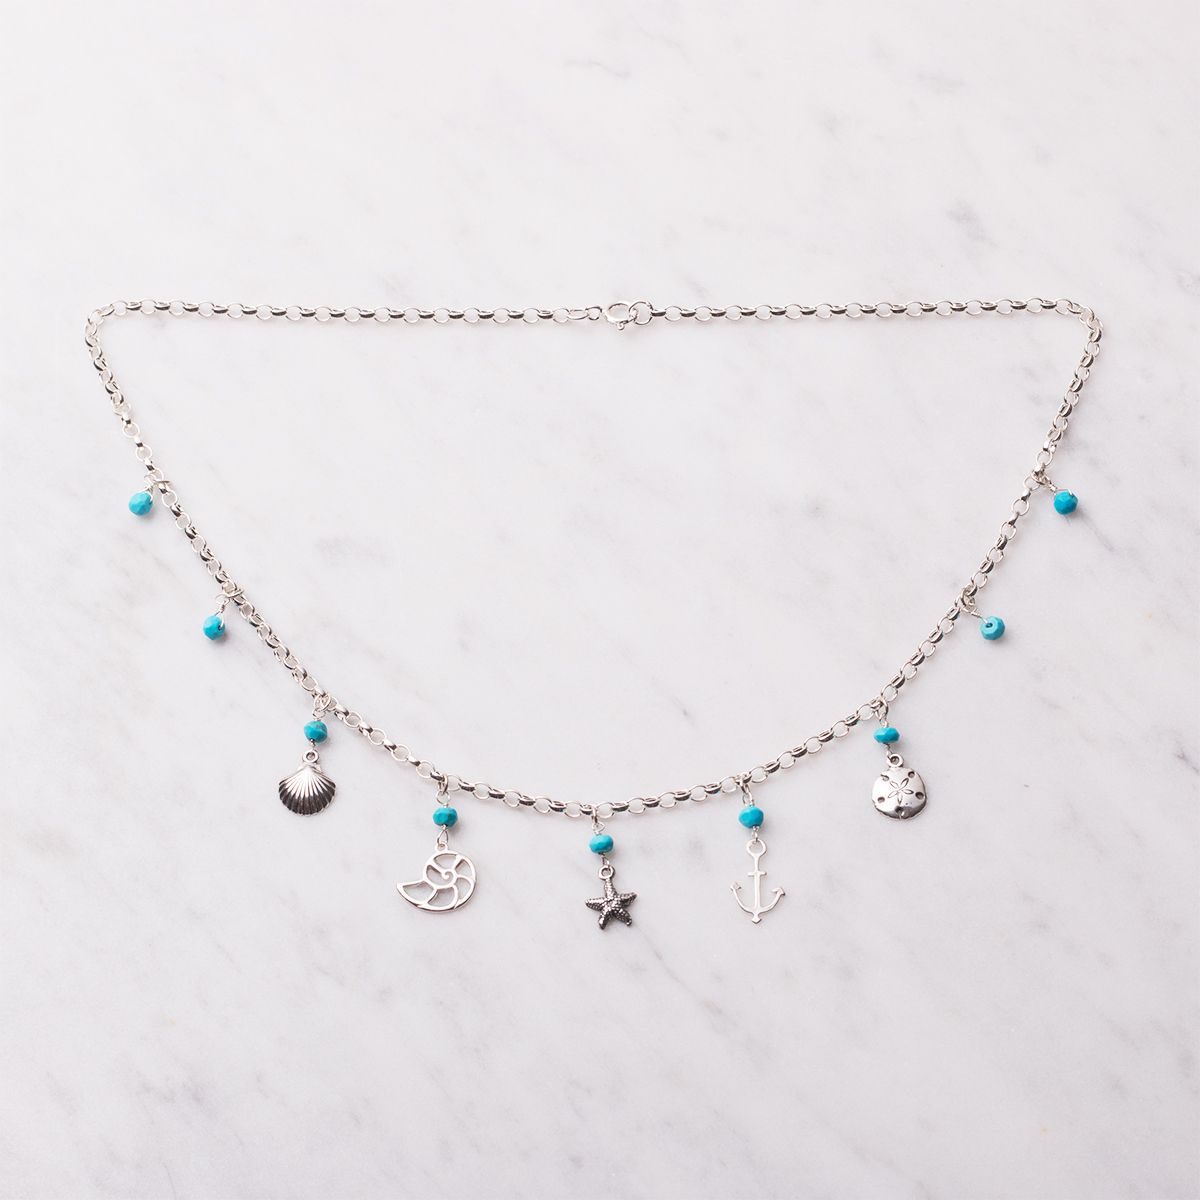 Turquoise & Beach Charm Necklace